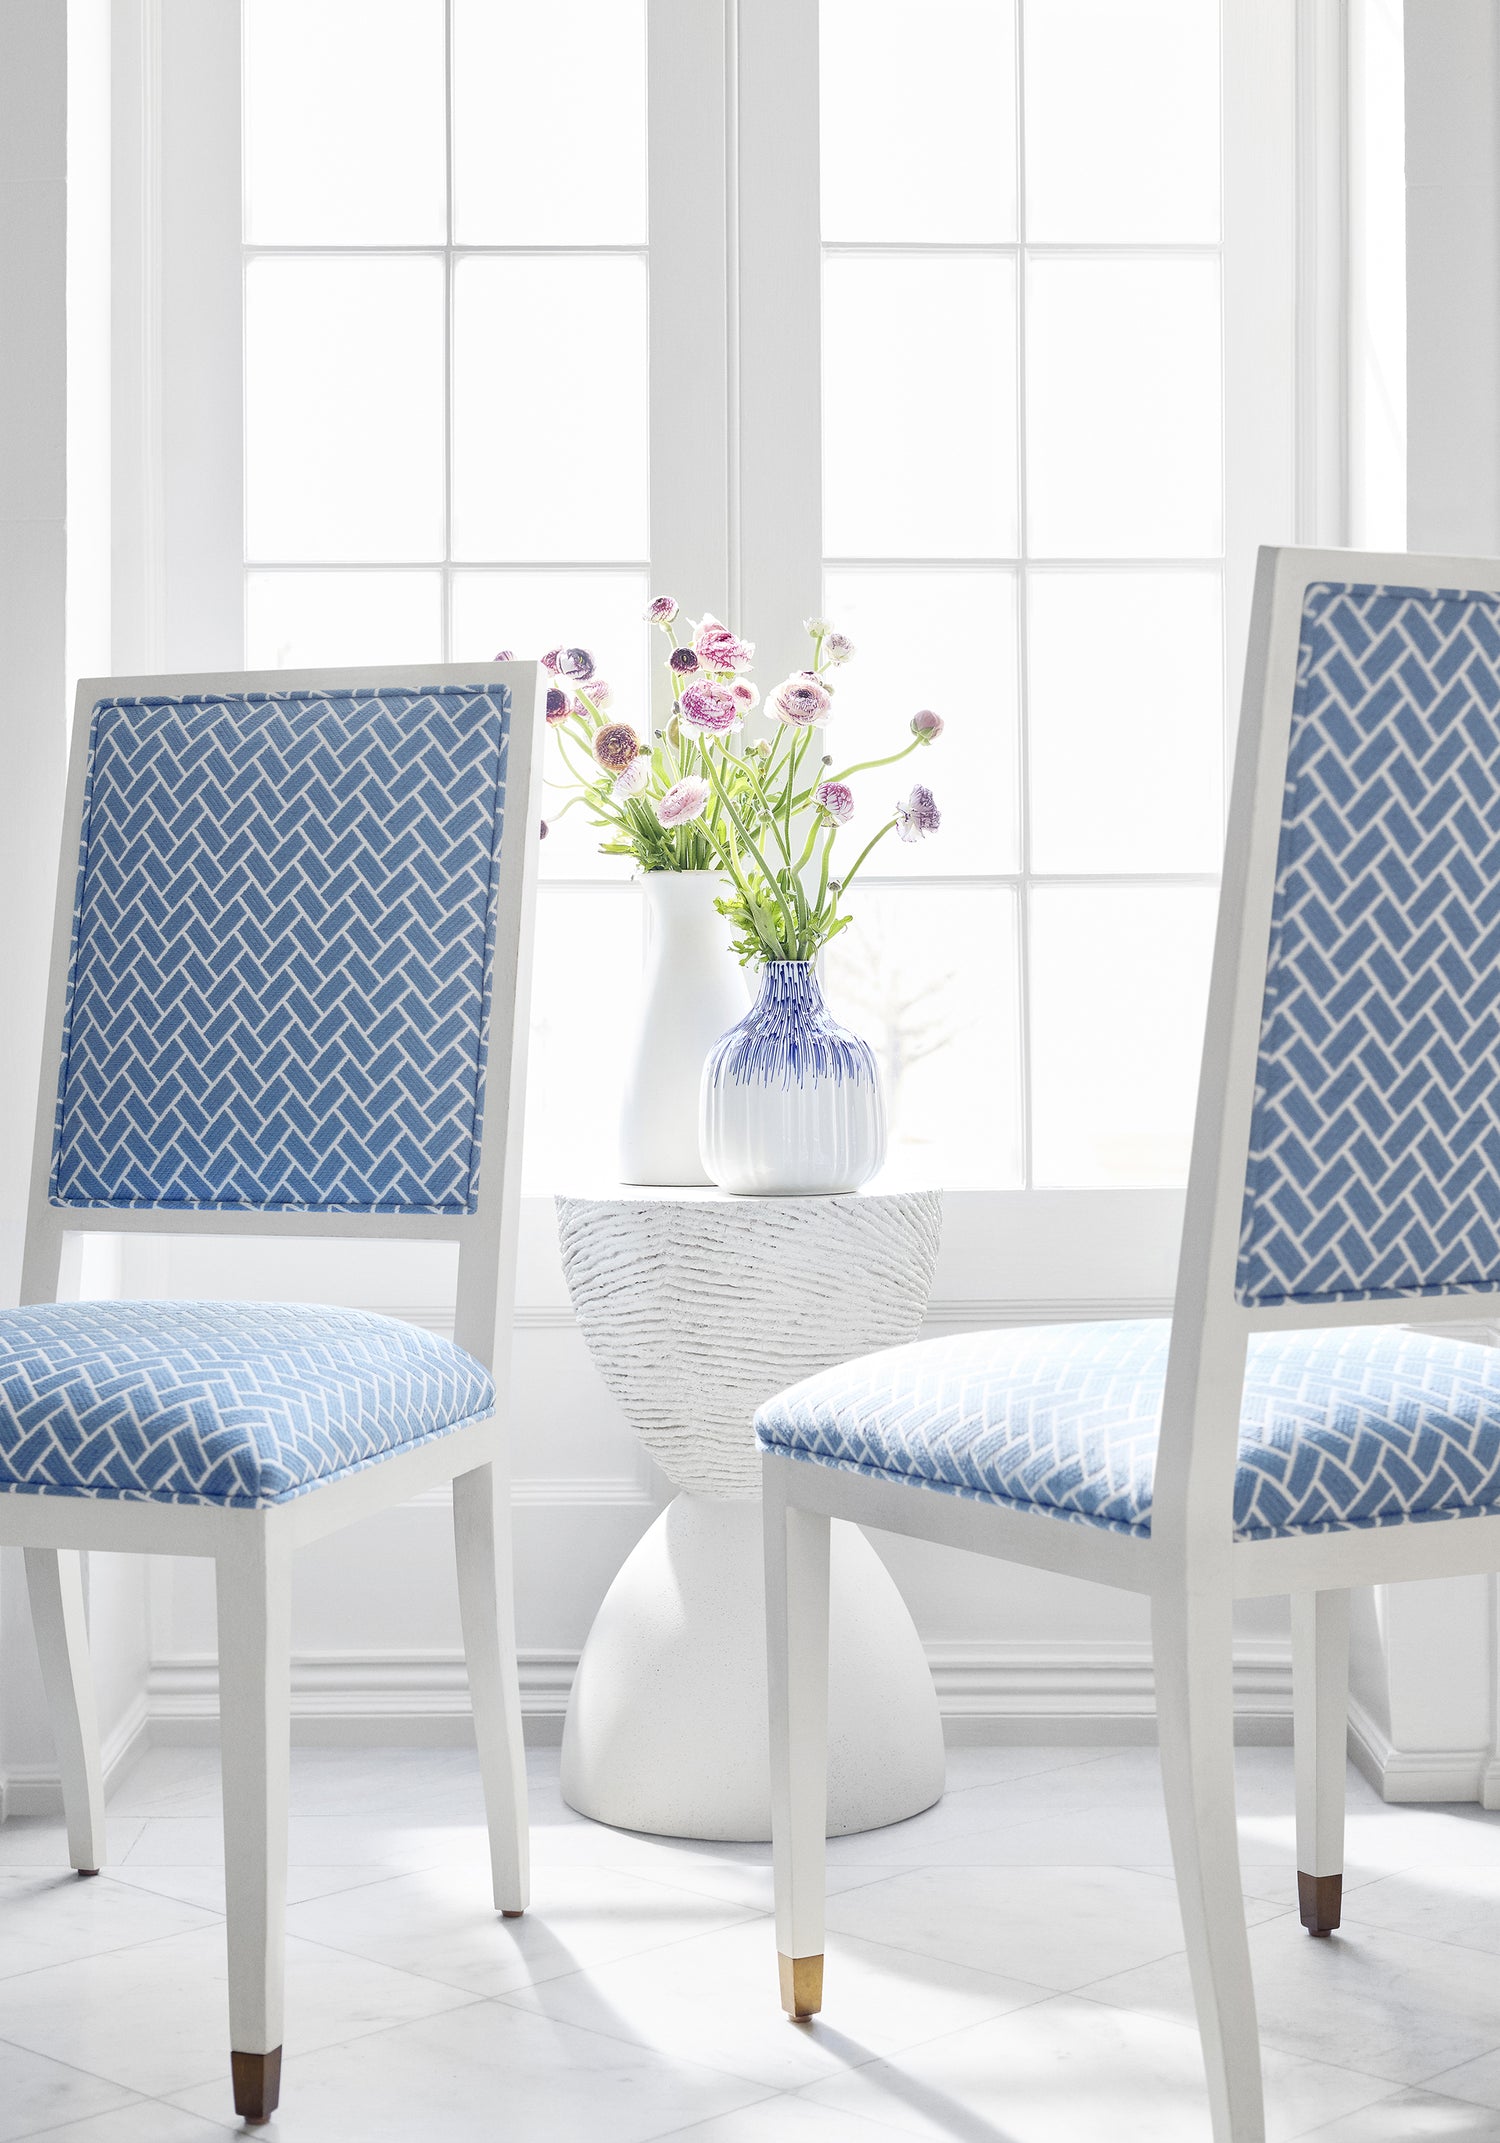 Lauderdale dining chairs in Thibaut Cobblestone woven fabric in Cornflower